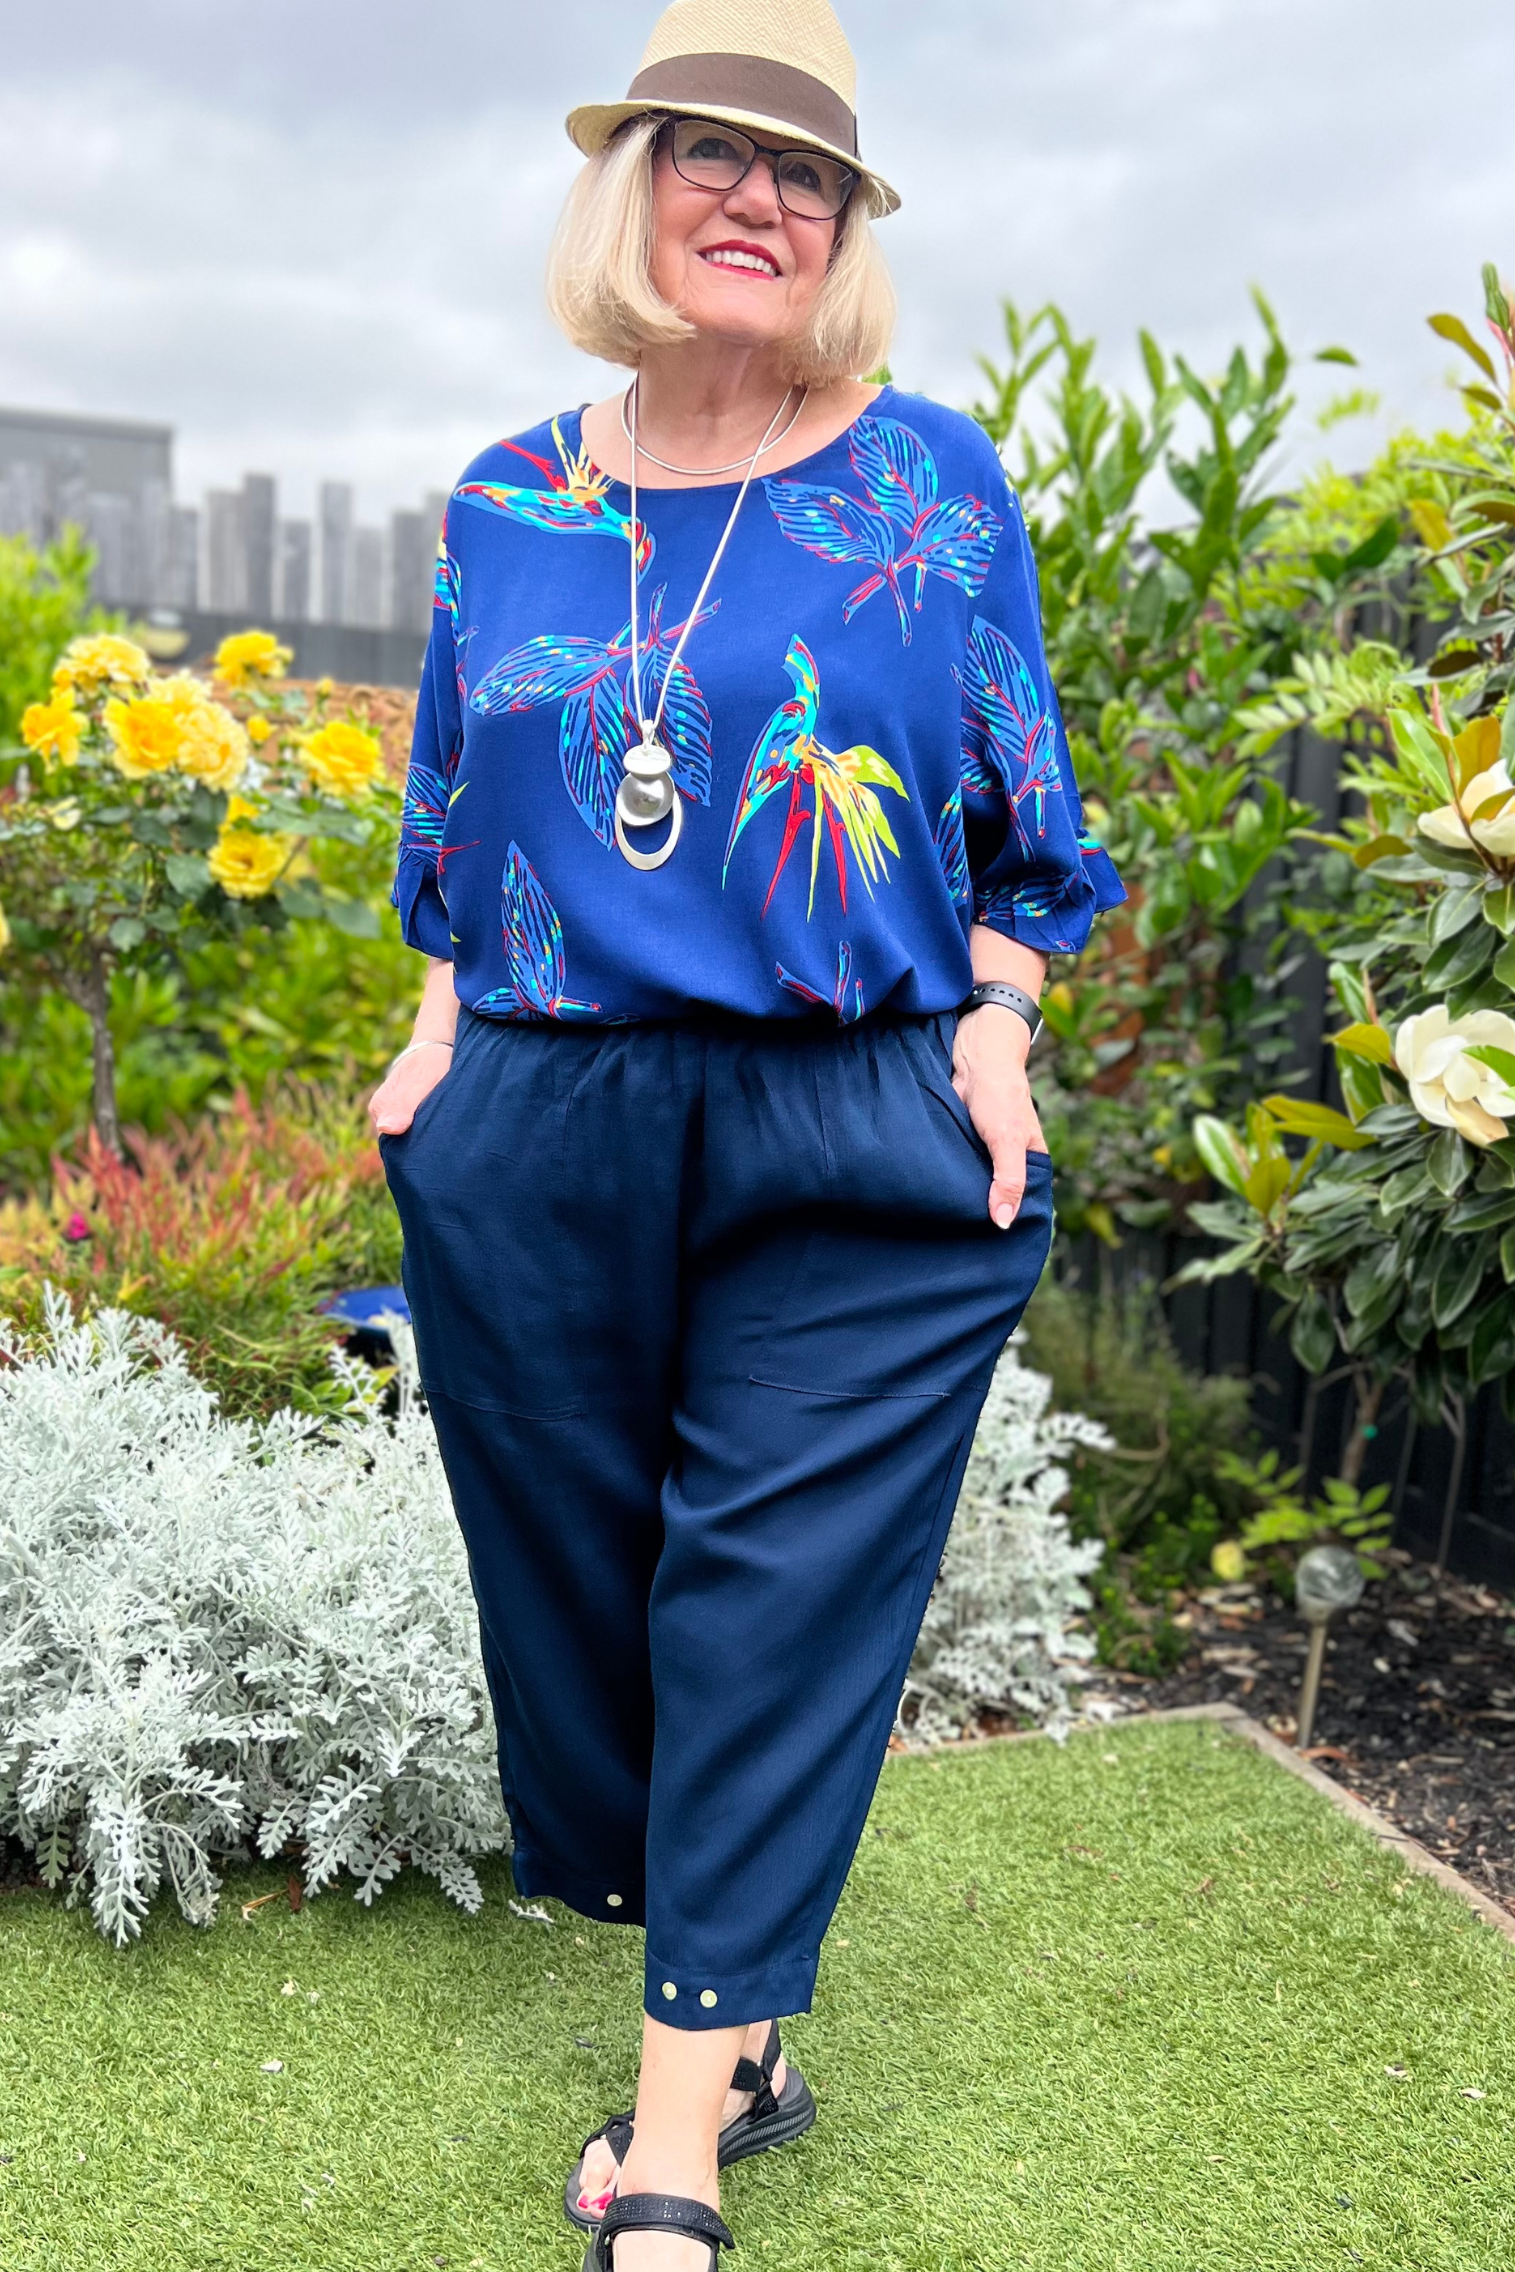 Kita Ku modelling a pant Sita in navy with button trim on the hem, also with a top Zara set in a sunny garden. 